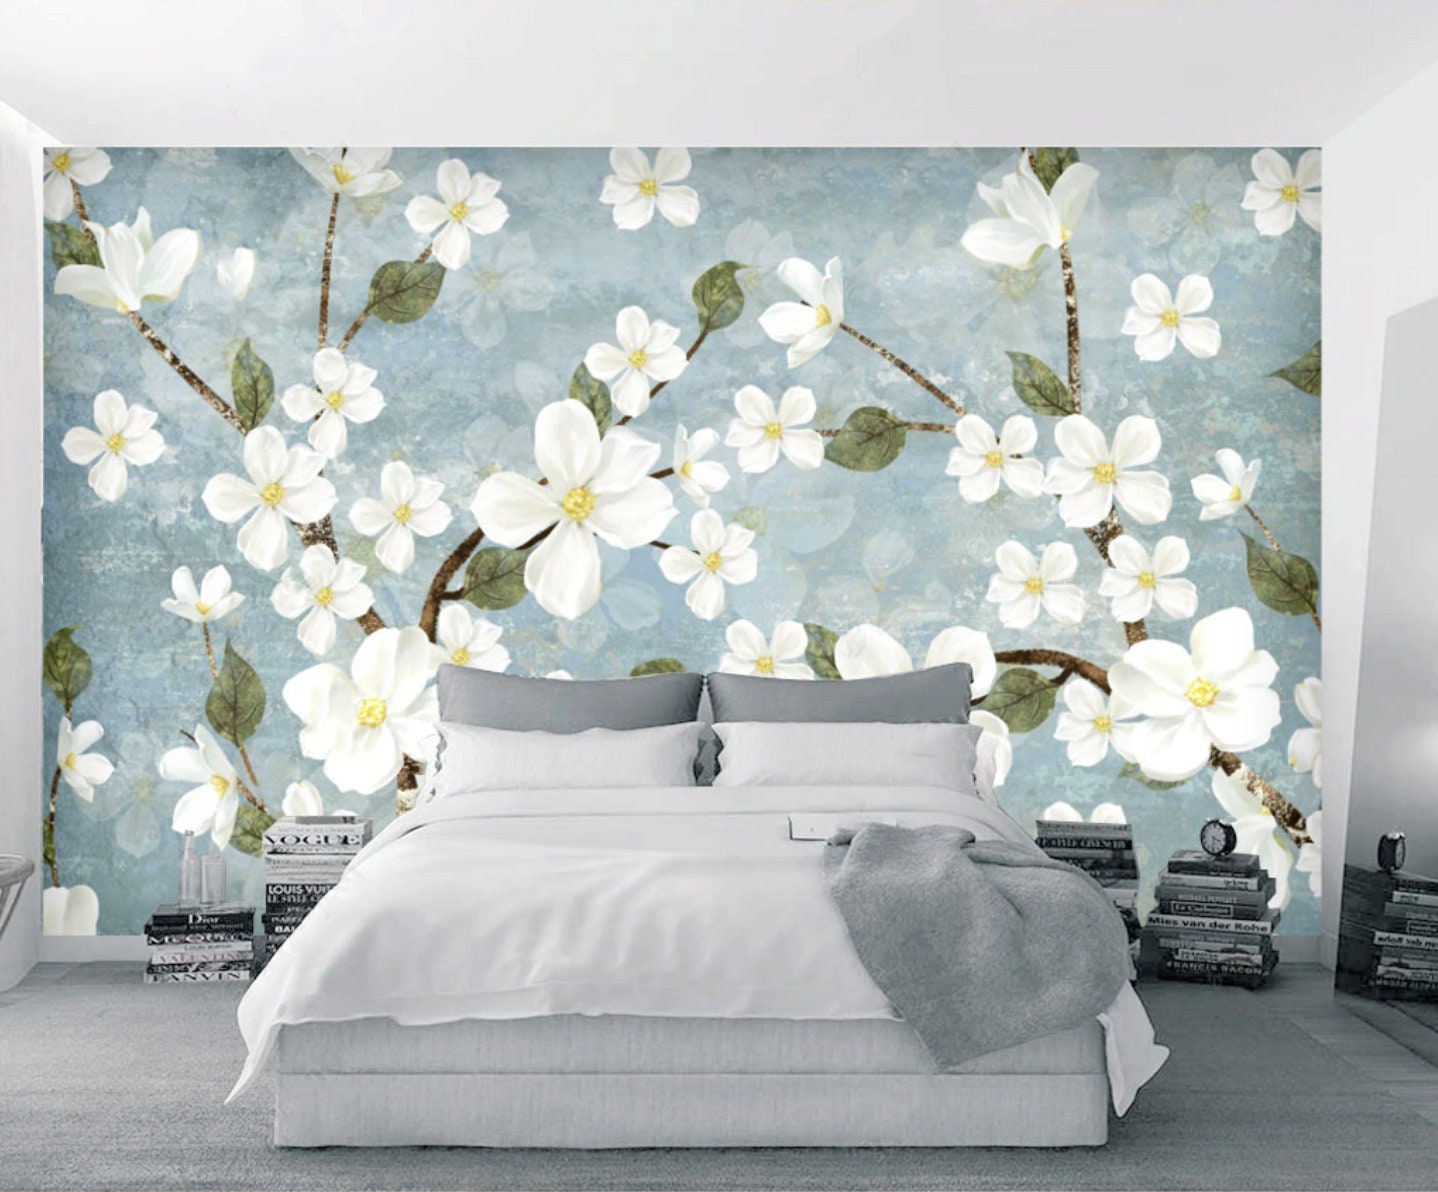 Peel and stick Home wall decor Sakura blossoms Botanical removable Japanese wall art Flowers wall mural prints Chinoiserie painted silk